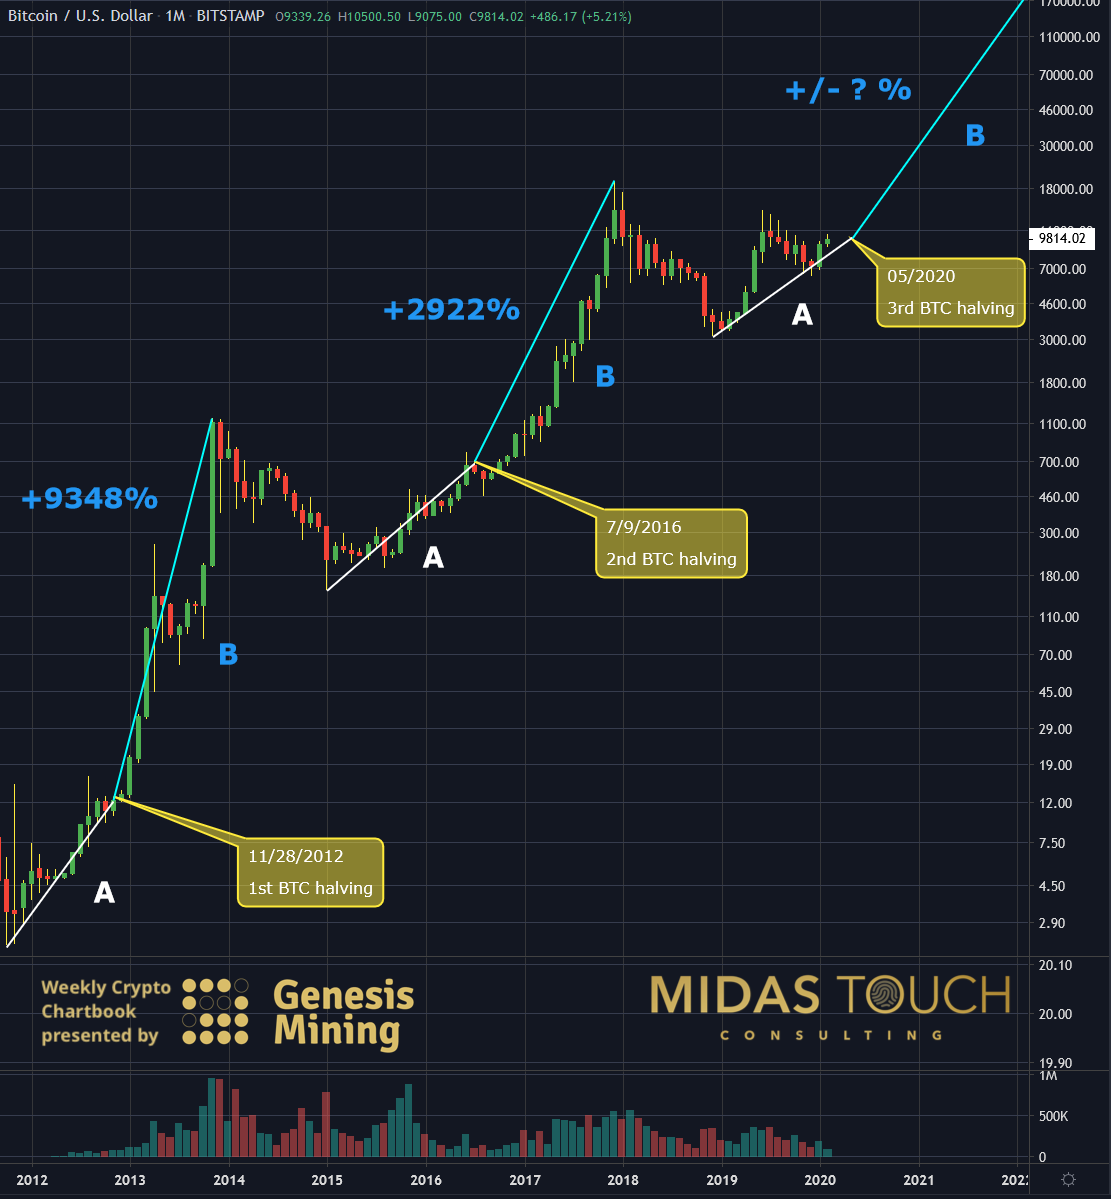 BTCUSD monthly chart as of February 18th, 2020